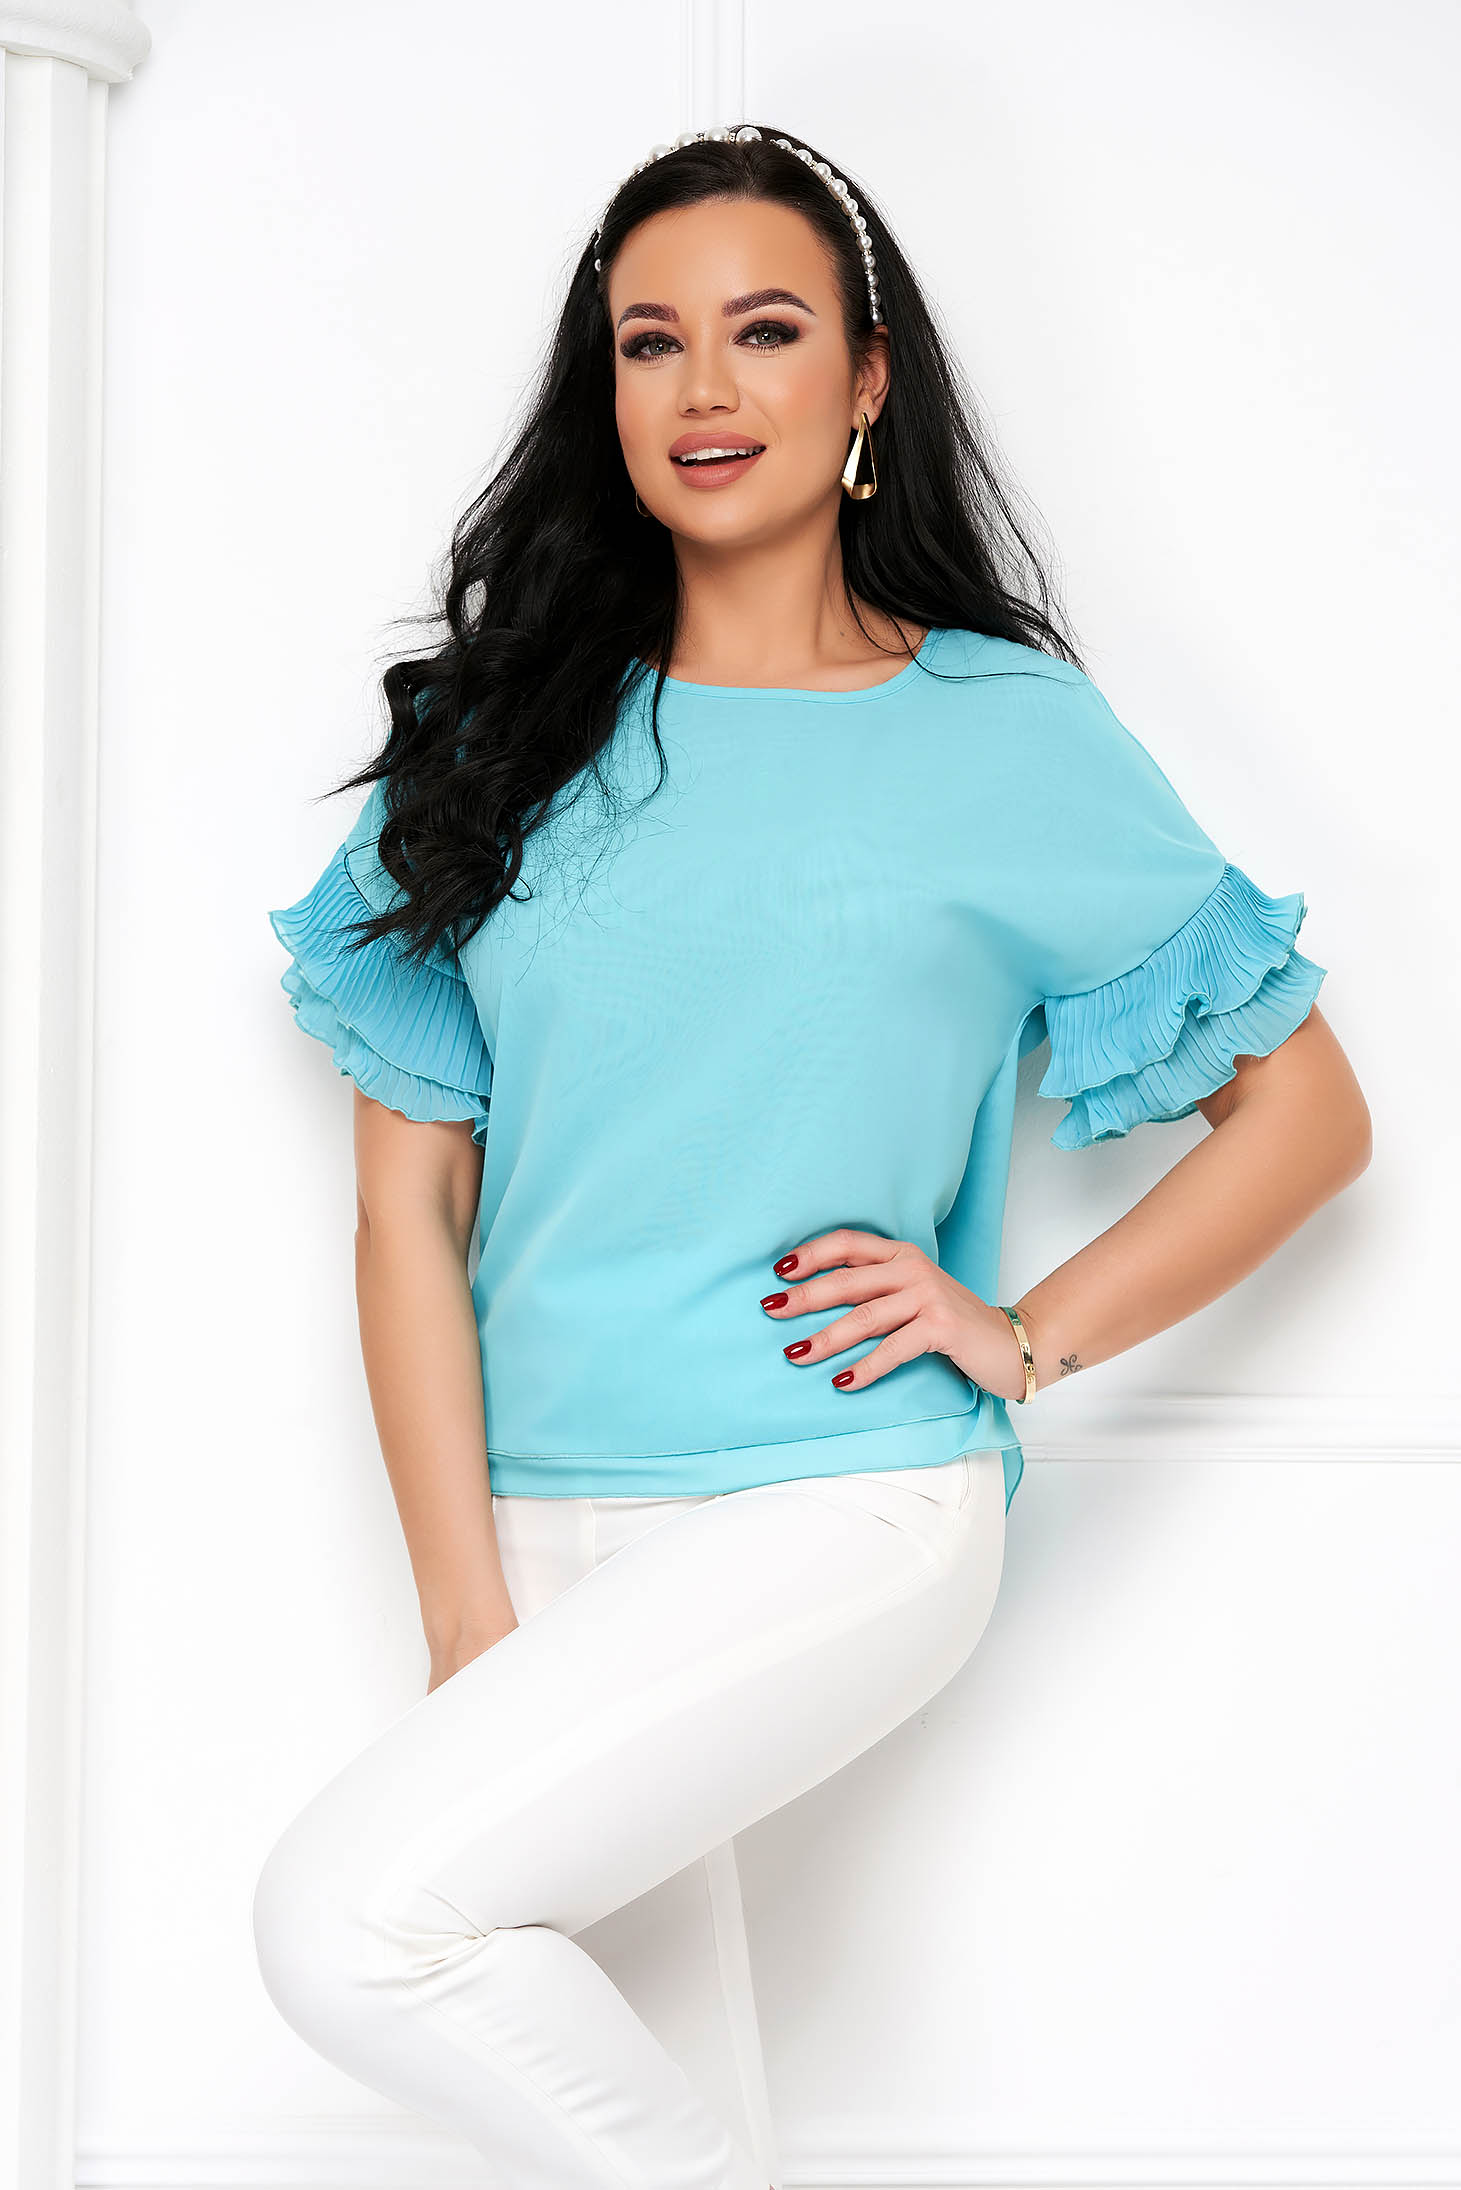 Light Blue Voile Women's Blouse with Loose Fit and Sleeve Ruffles - StarShinerS 1 - StarShinerS.com